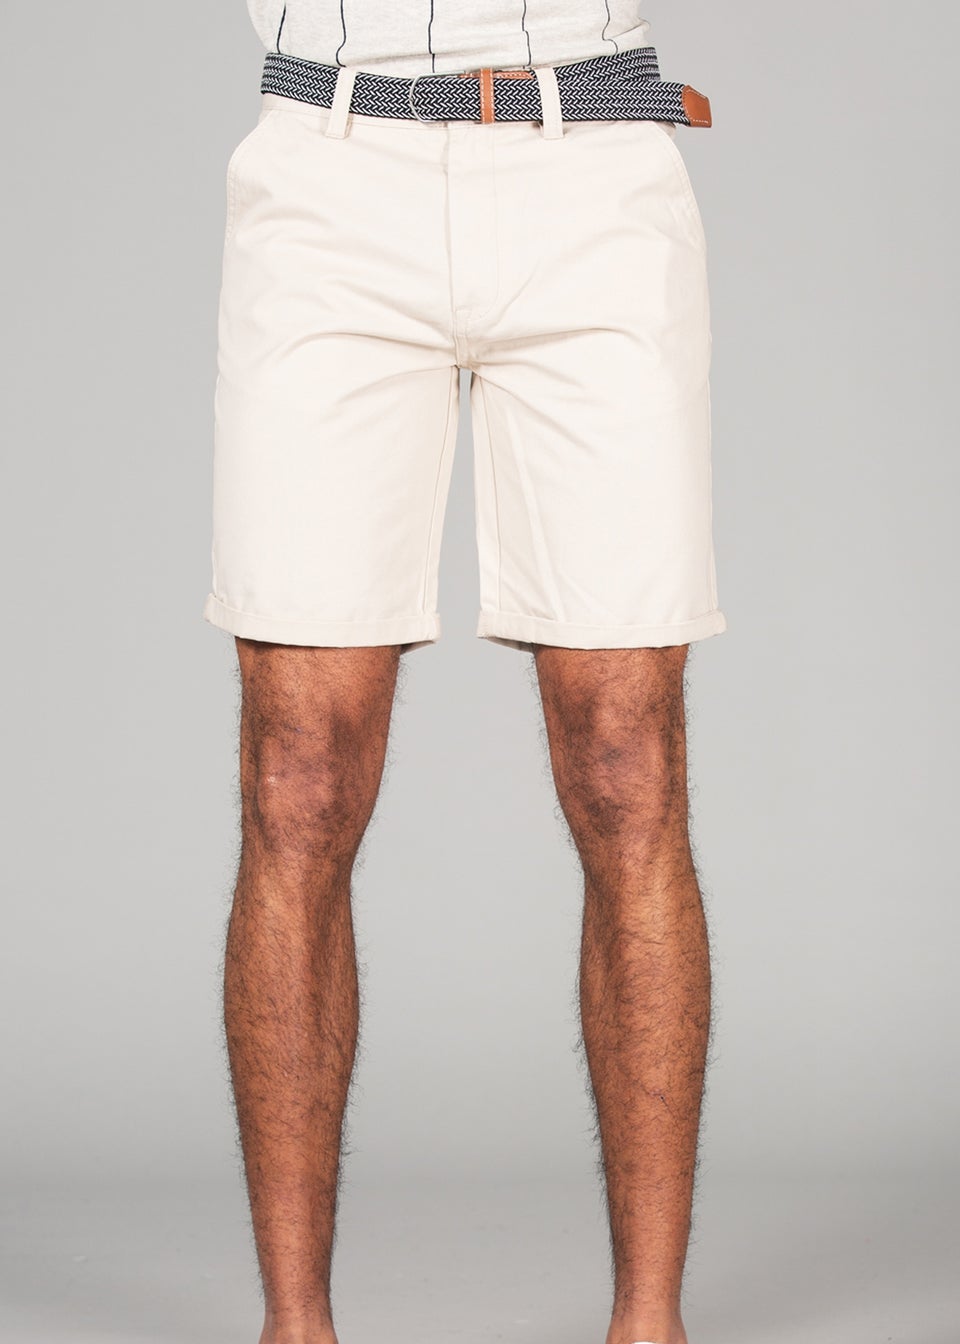 Tokyo Laundry Brown Cotton Belted Chino Shorts